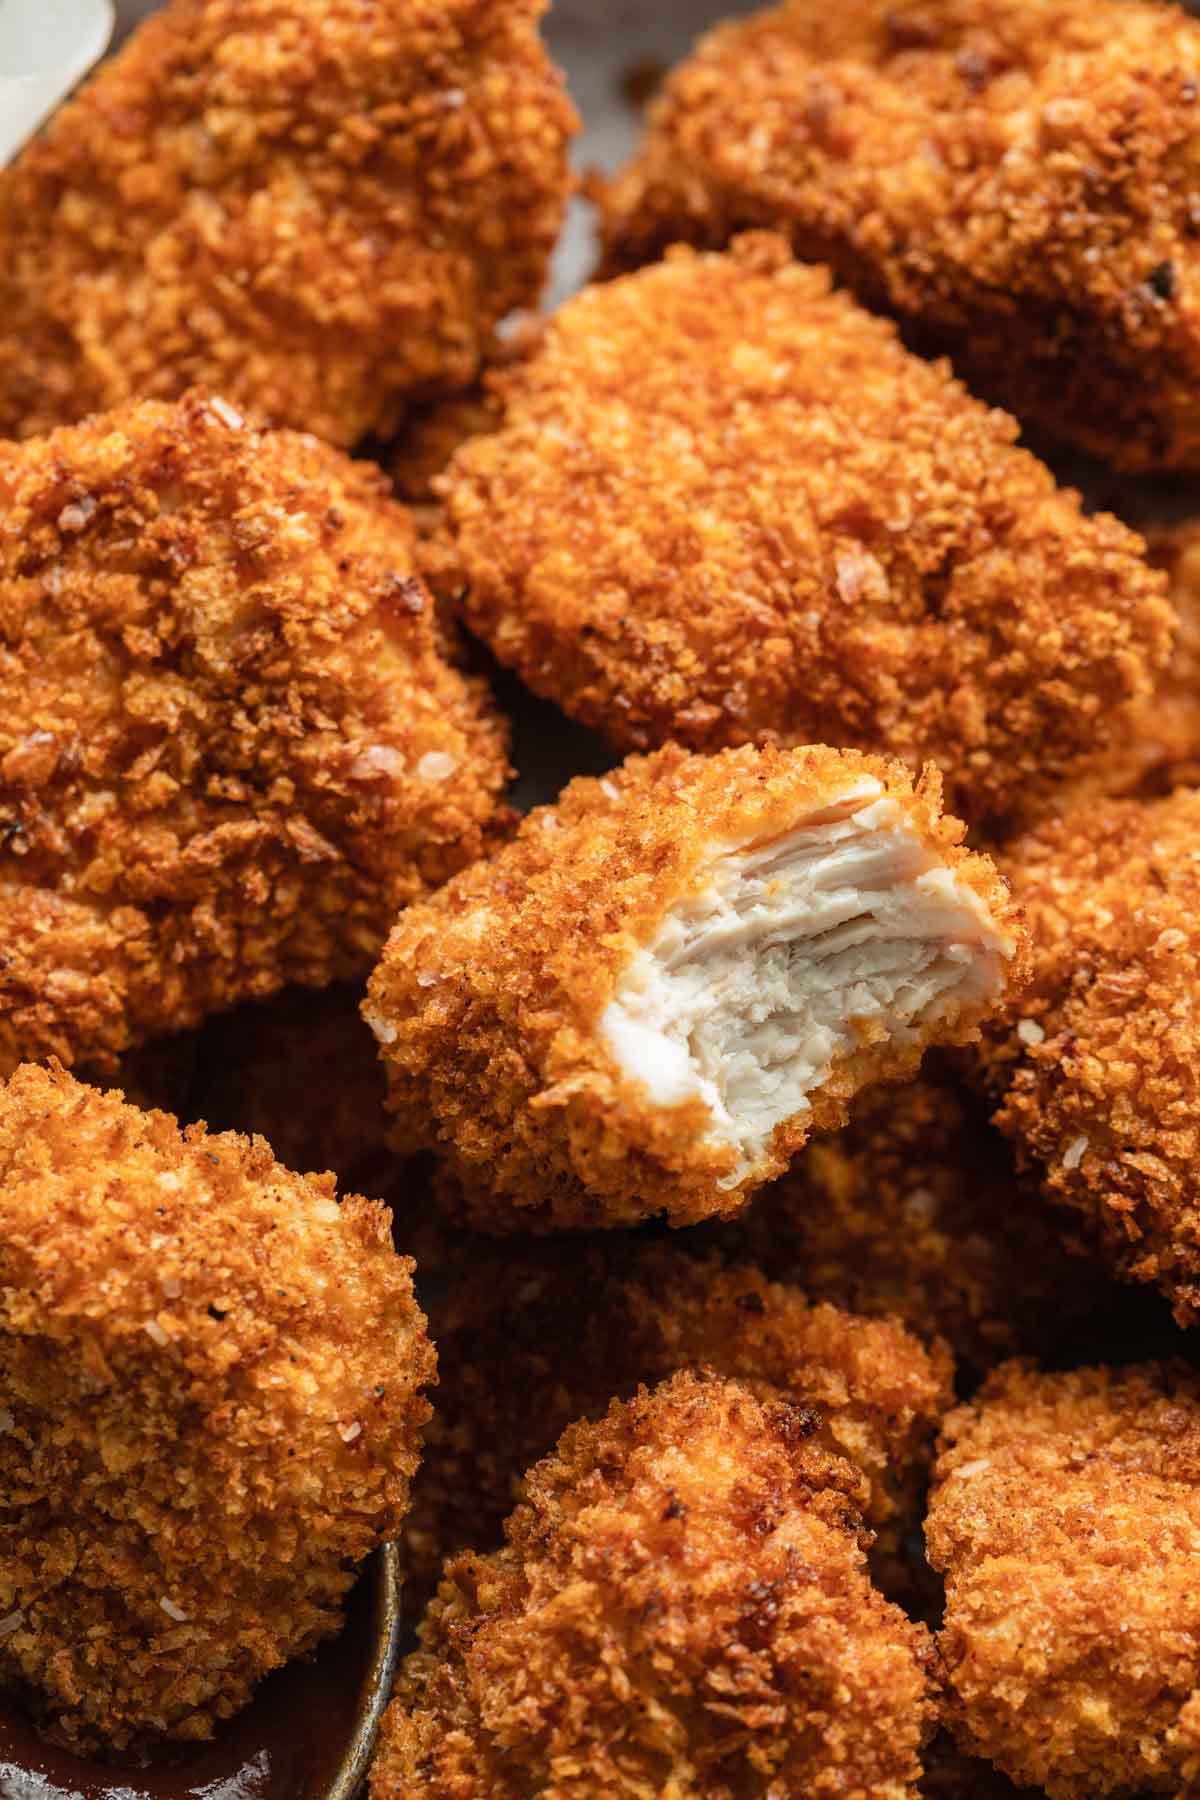 Close up view of a chicken nugget with a bite taken out of it.